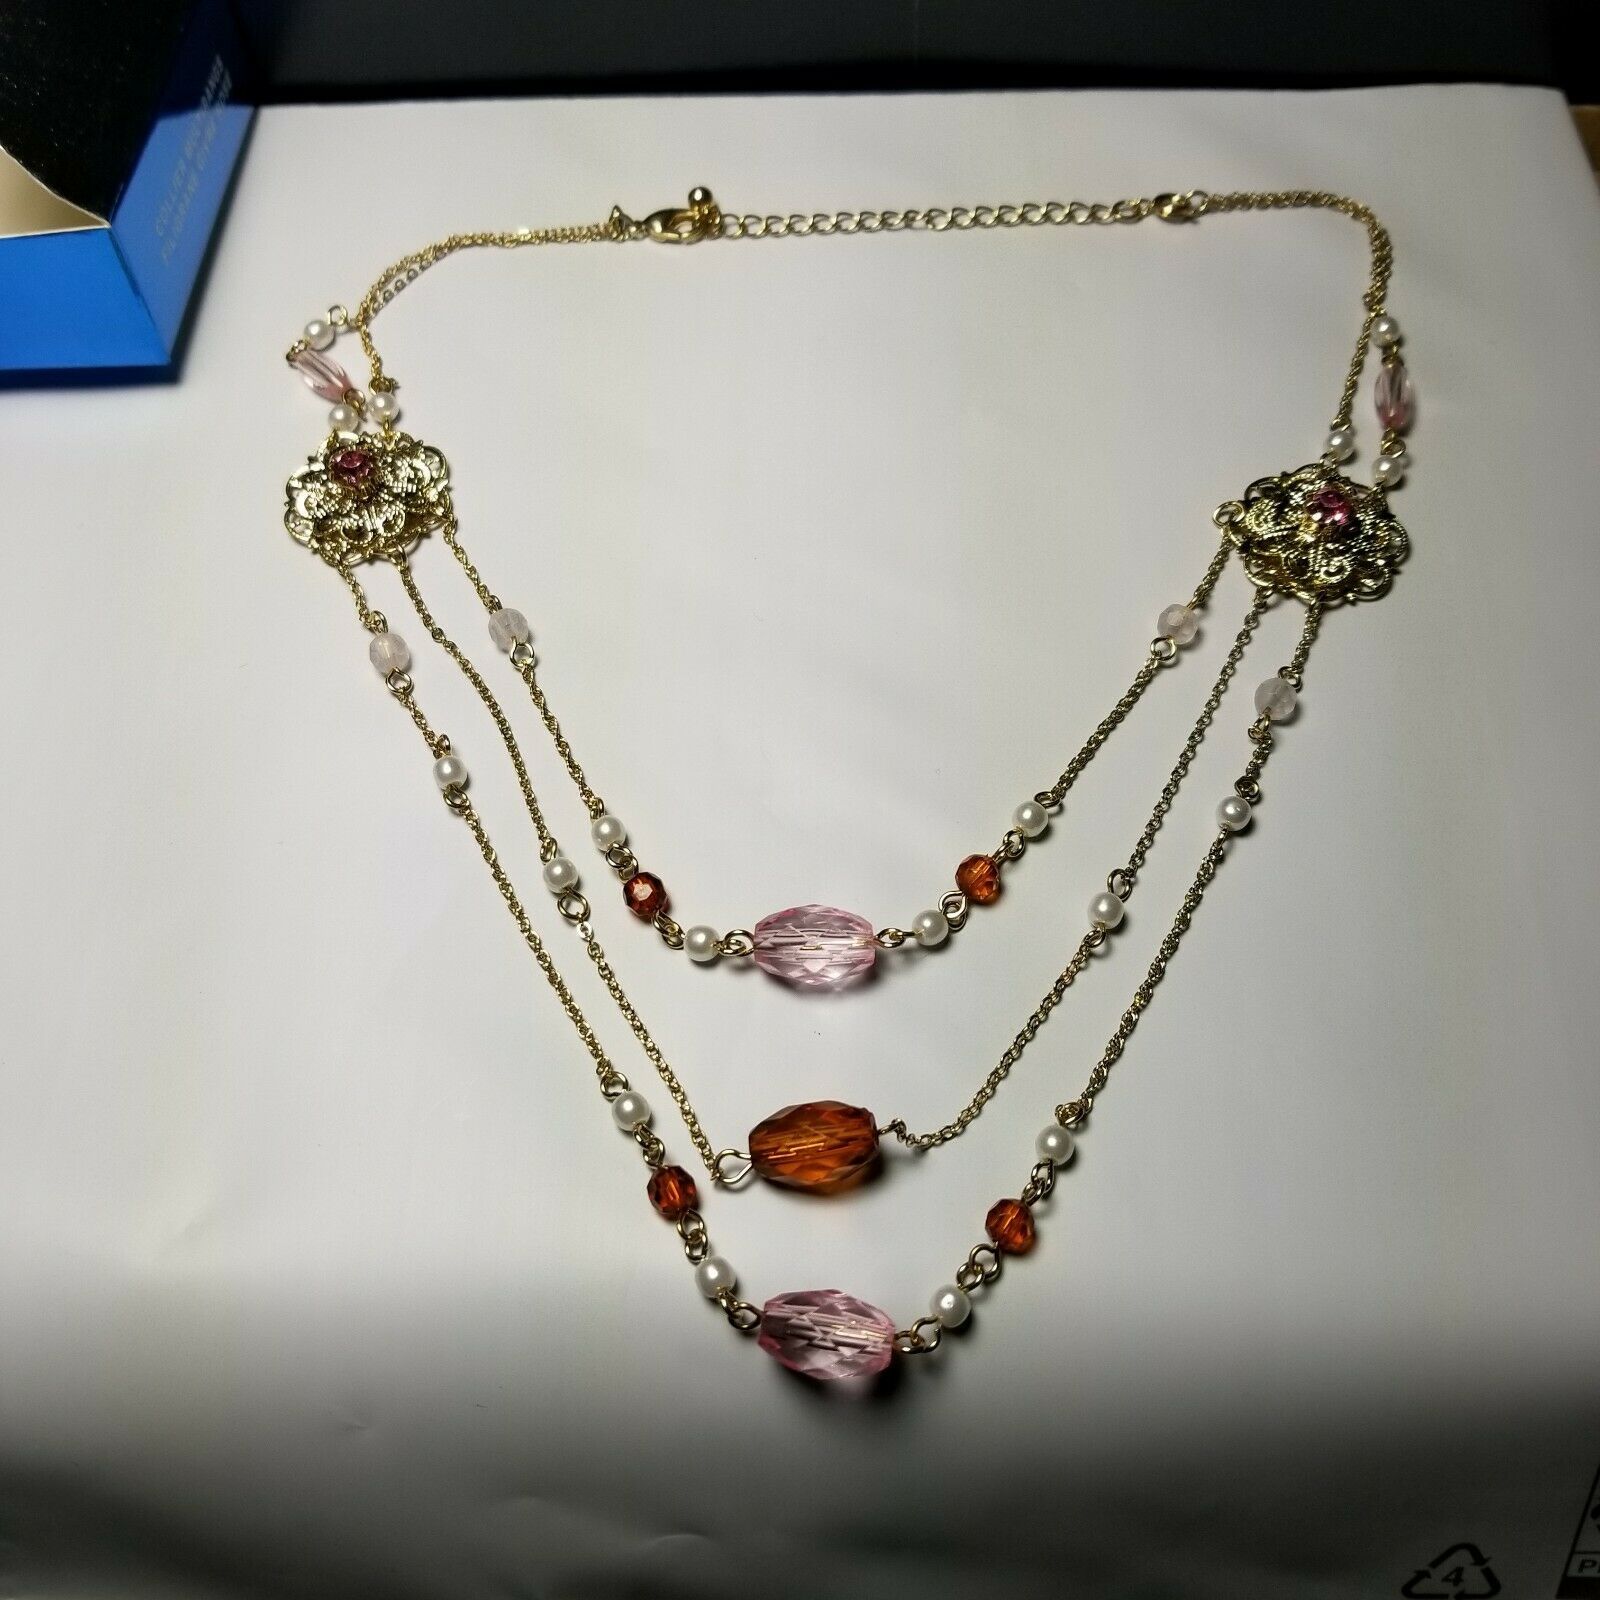 Avon 2007 Pink Frosted Filigree Multistrand Necklace - $9.49